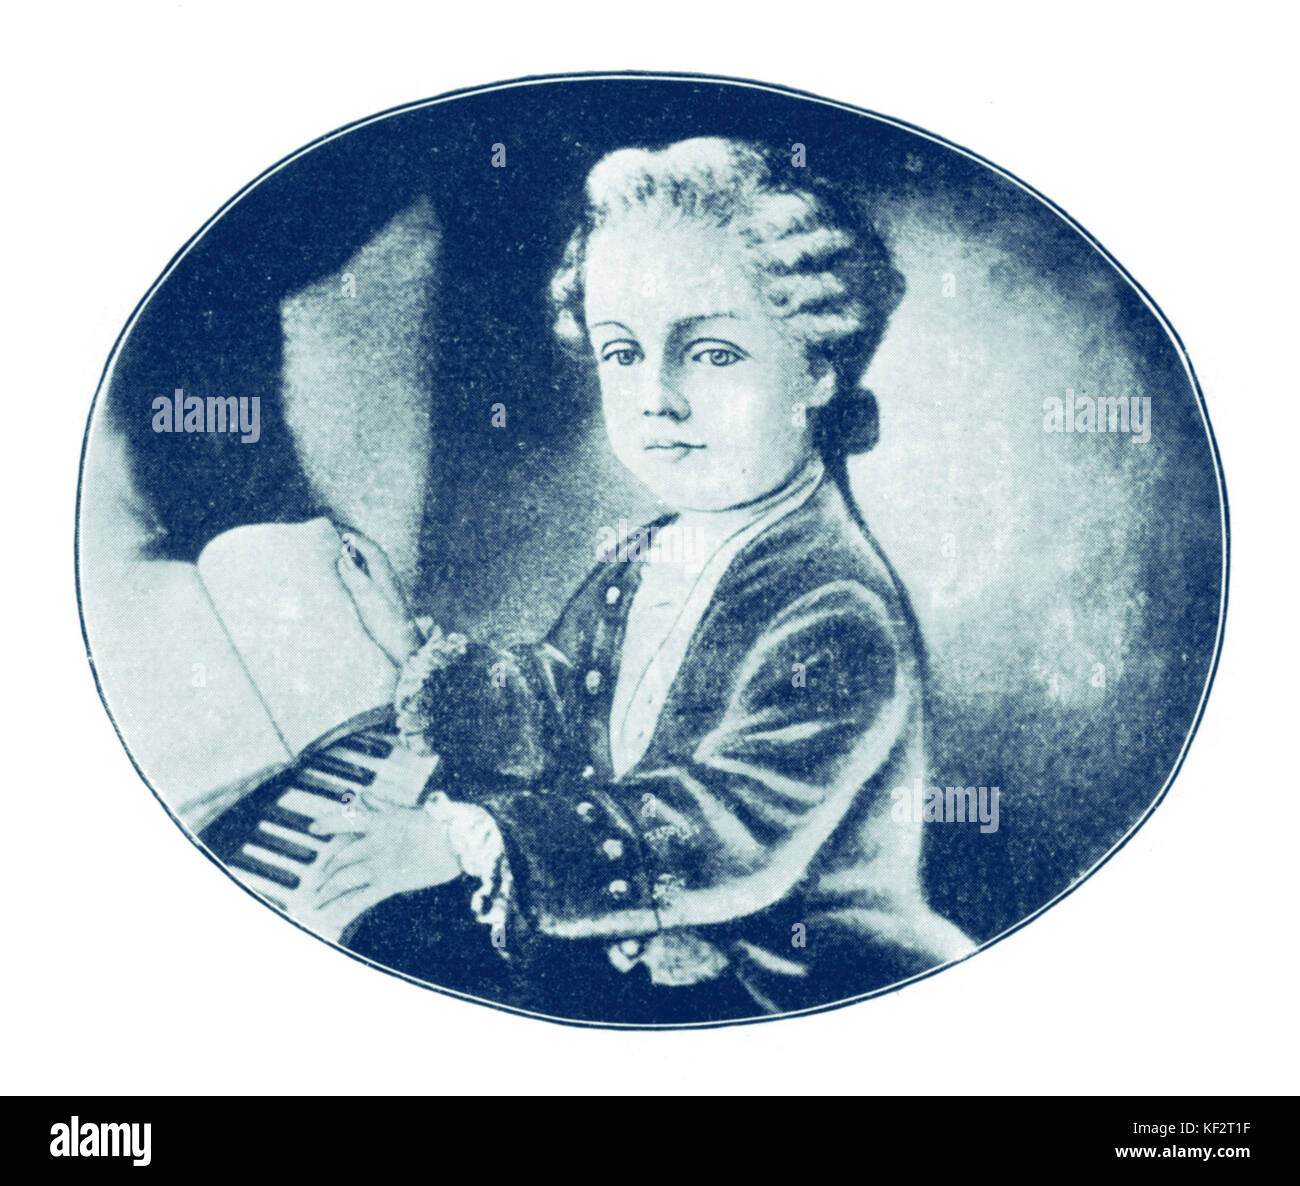 Wolfgang Amadeus Mozart at piano, age 5. Austrian composer, 1756-1791 Stock Photo